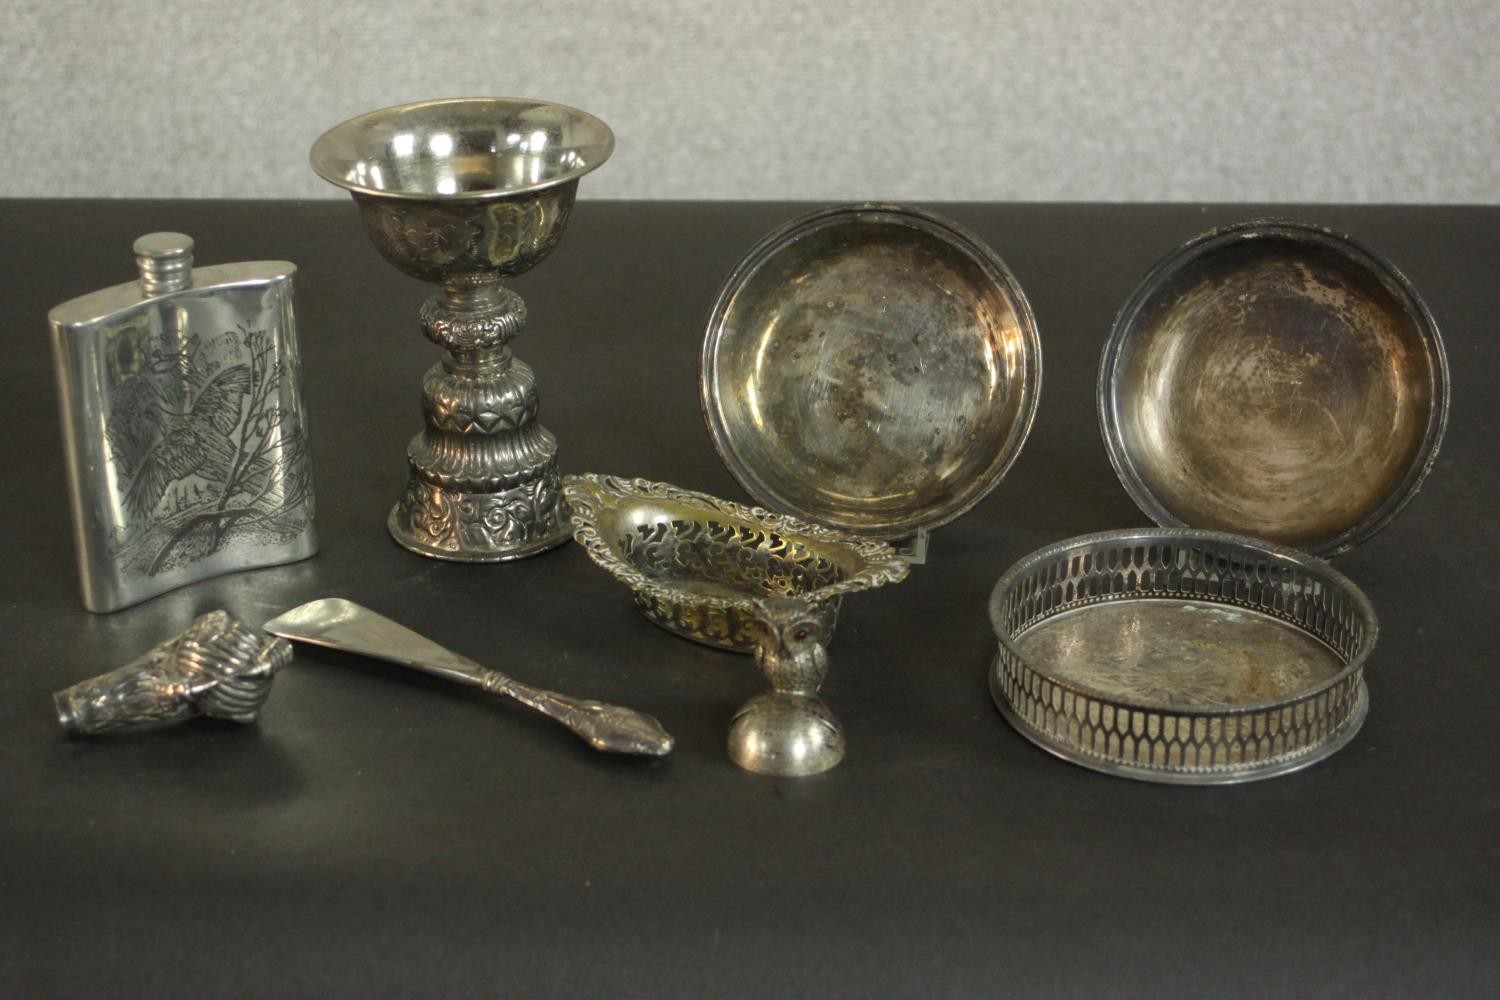 A collection of silver and silver plate items, including a novelty silver owl menu holder, a